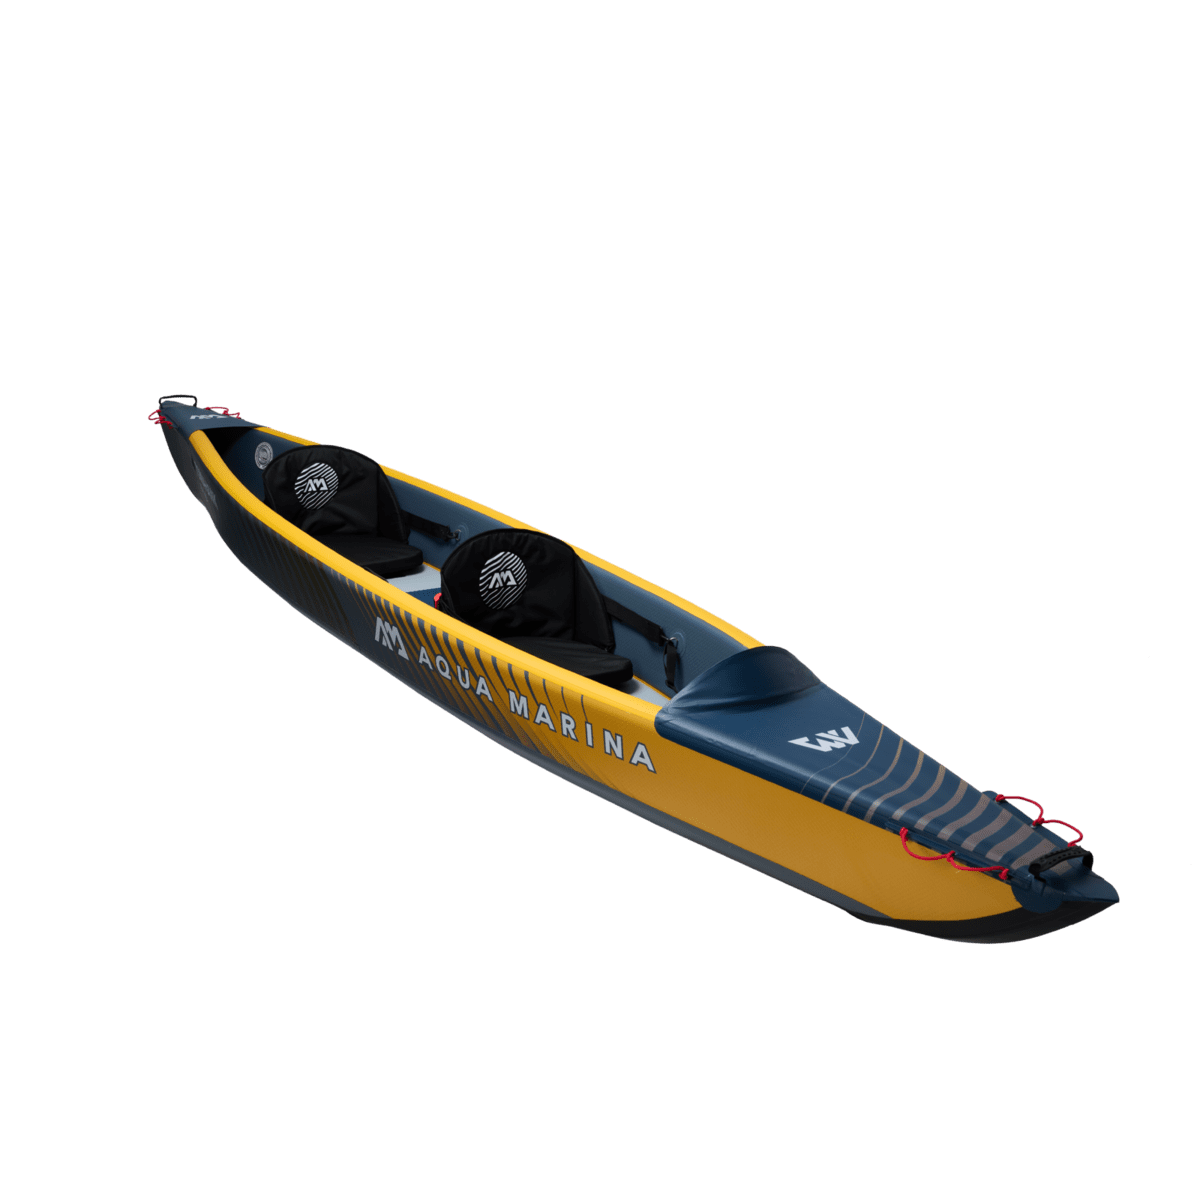 Aqua Marina Tomahawk AIR-K 440 High Pressure Speed 2 Person Inflatable Kayak(paddle excluded)